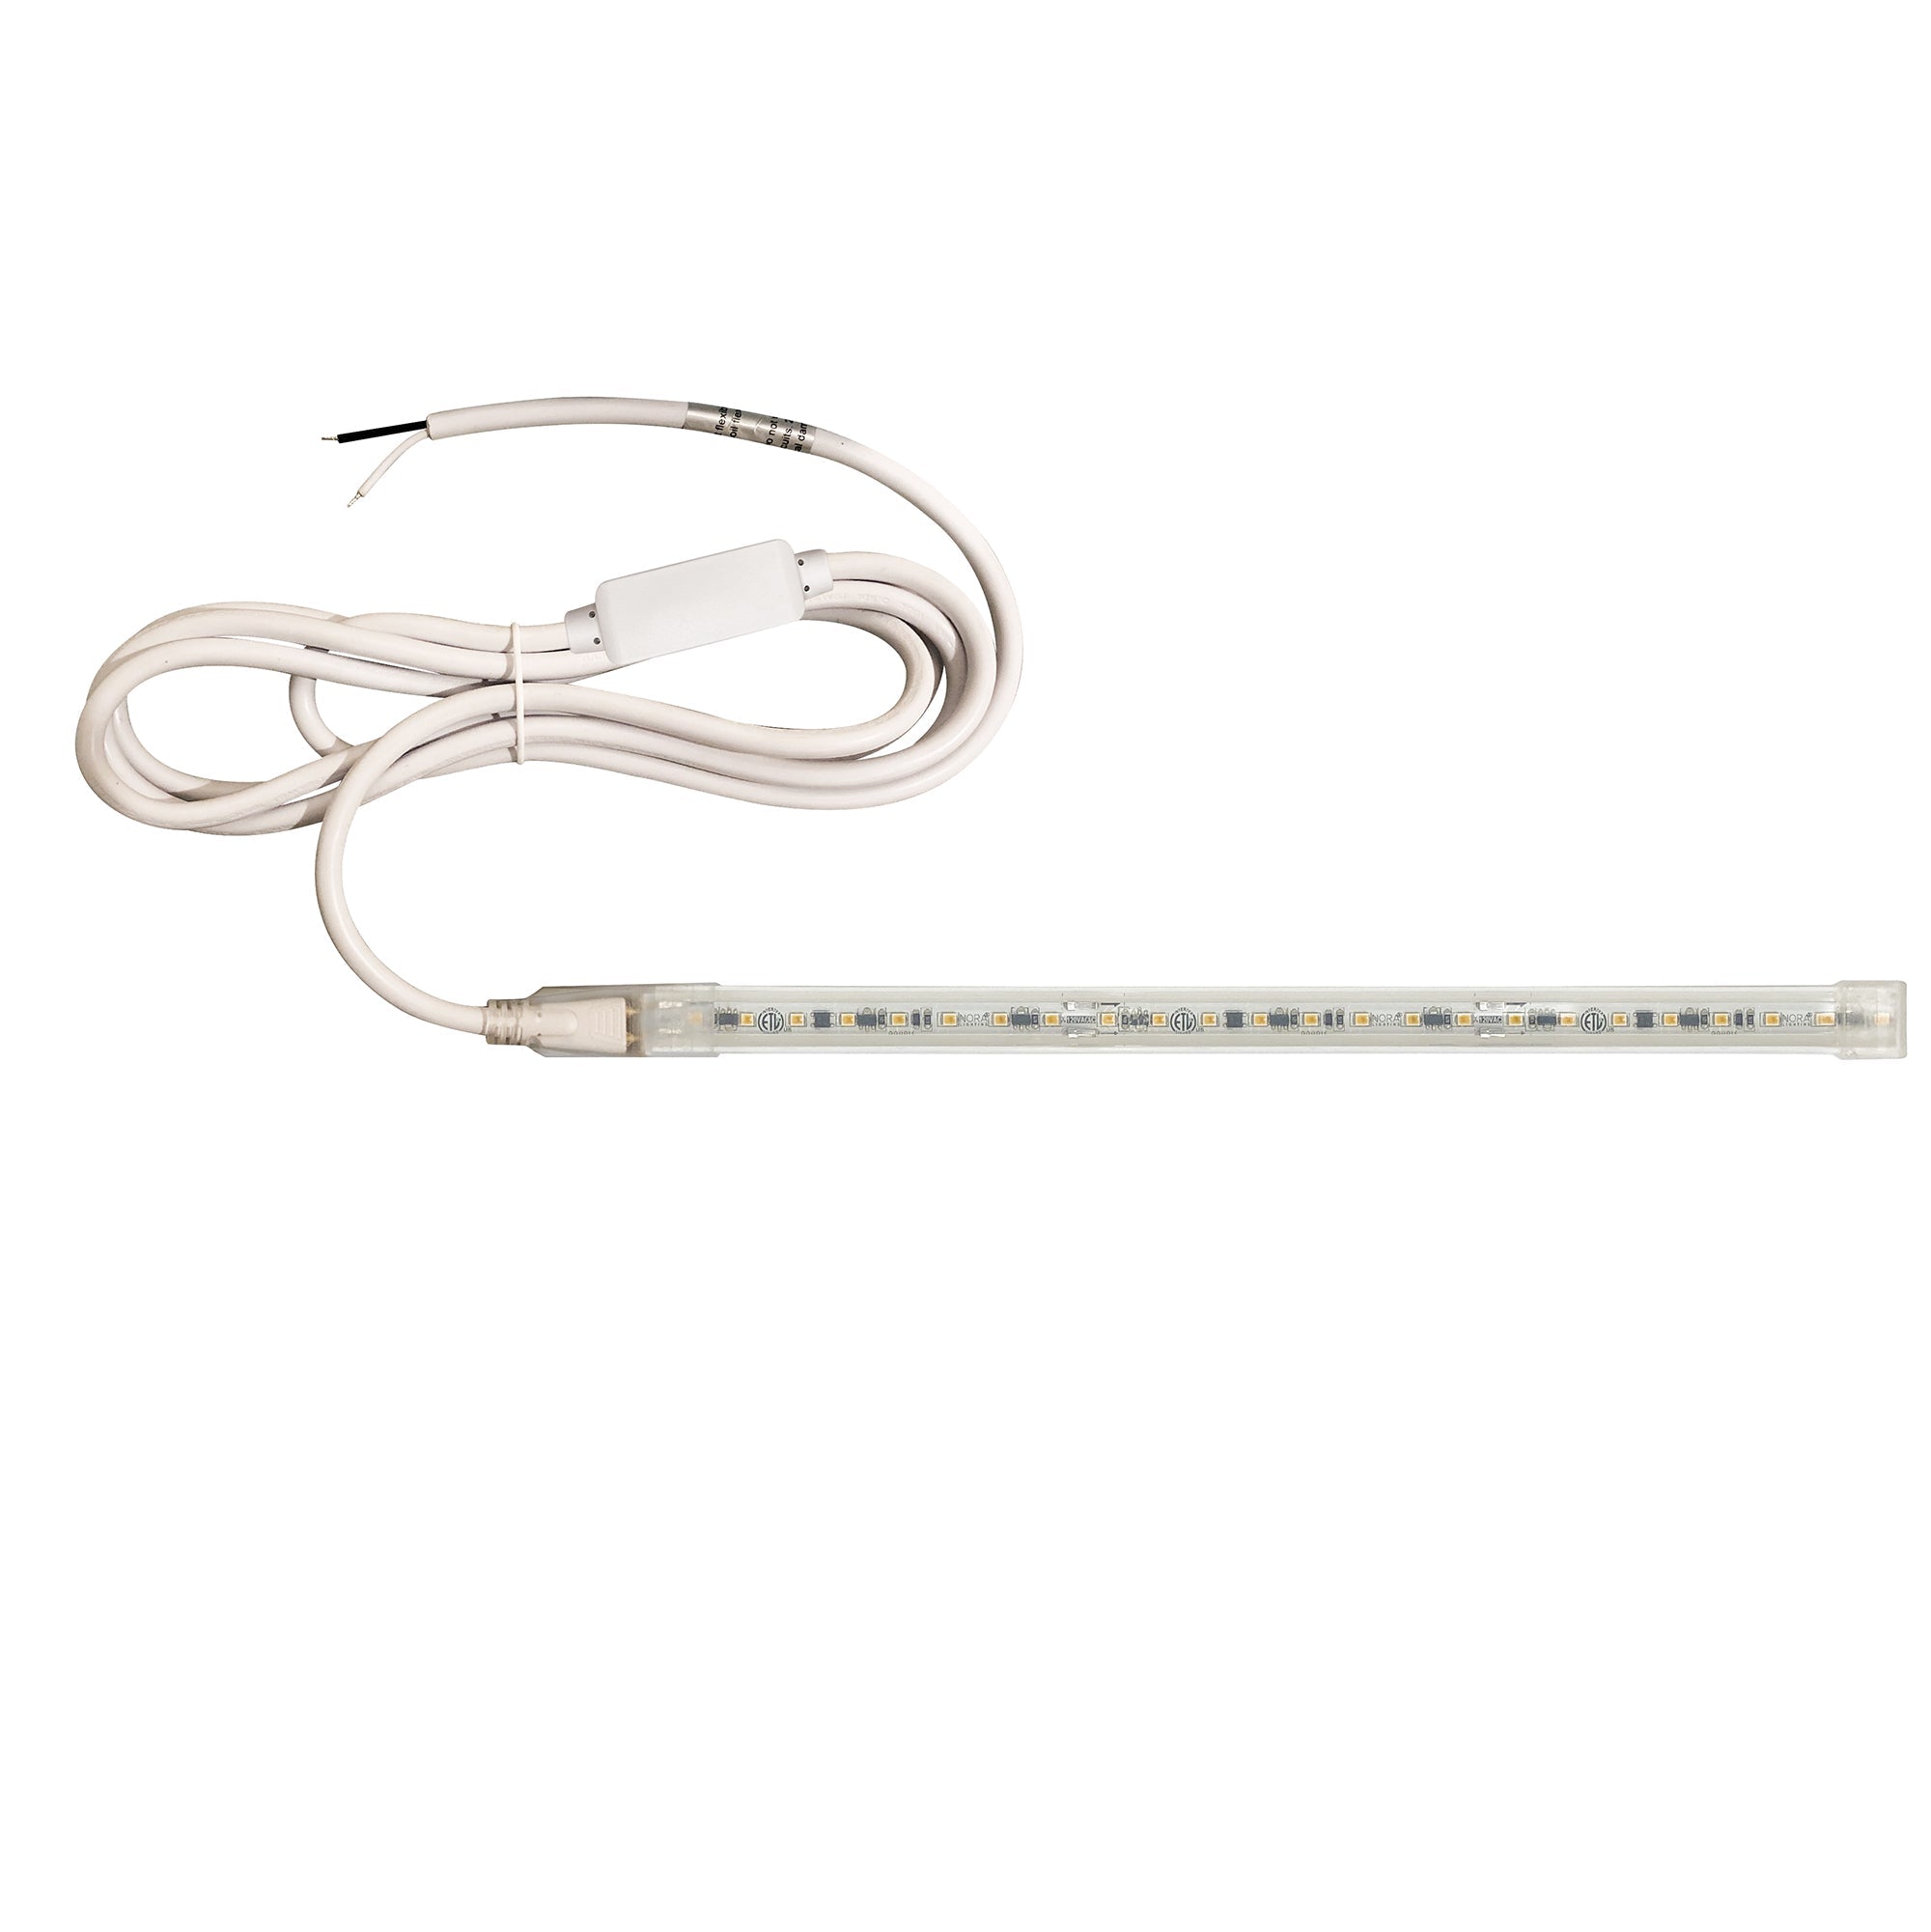 Nora Lighting NUTP13-W82-12-940/HWSP - Accent / Undercabinet - Custom Cut 82-ft 120V Continuous LED Tape Light, 330lm / 3.6W per foot, 4000K, w/ Mounting Clips and 8' Hardwired Power Cord w/ Surge Protector